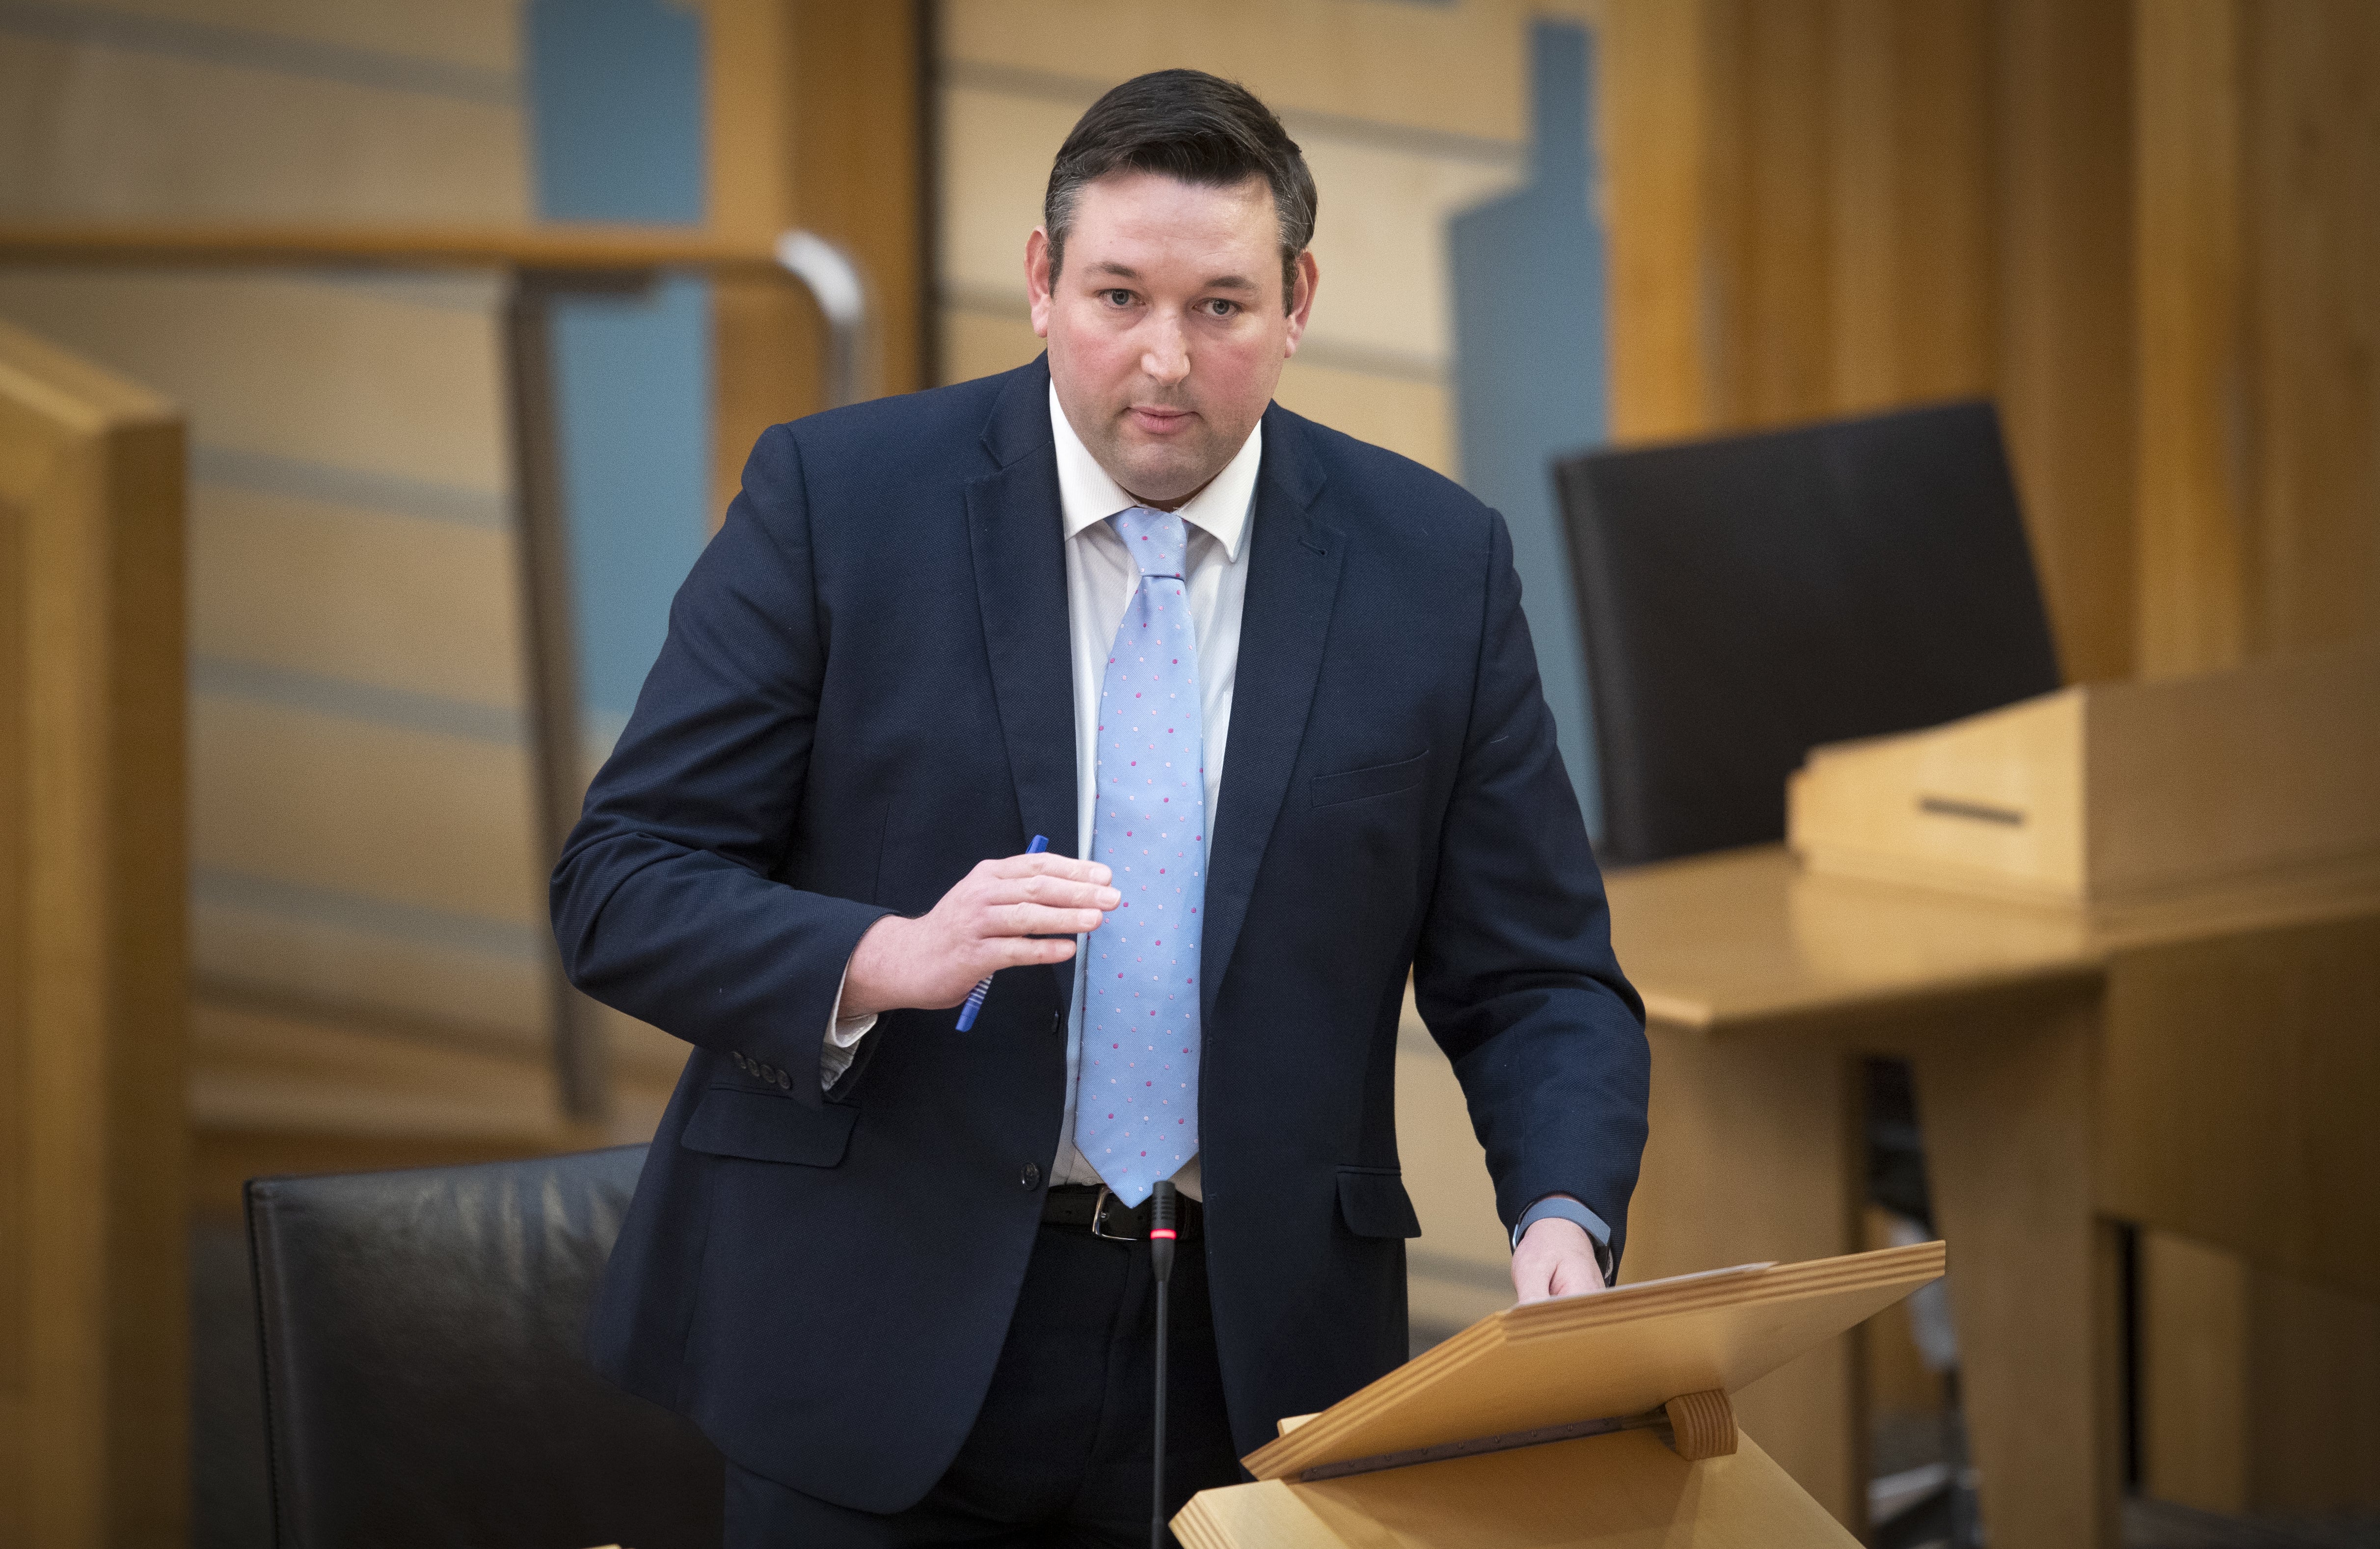 Miles Briggs said the minister should apologise (Jane Barlow/PA)